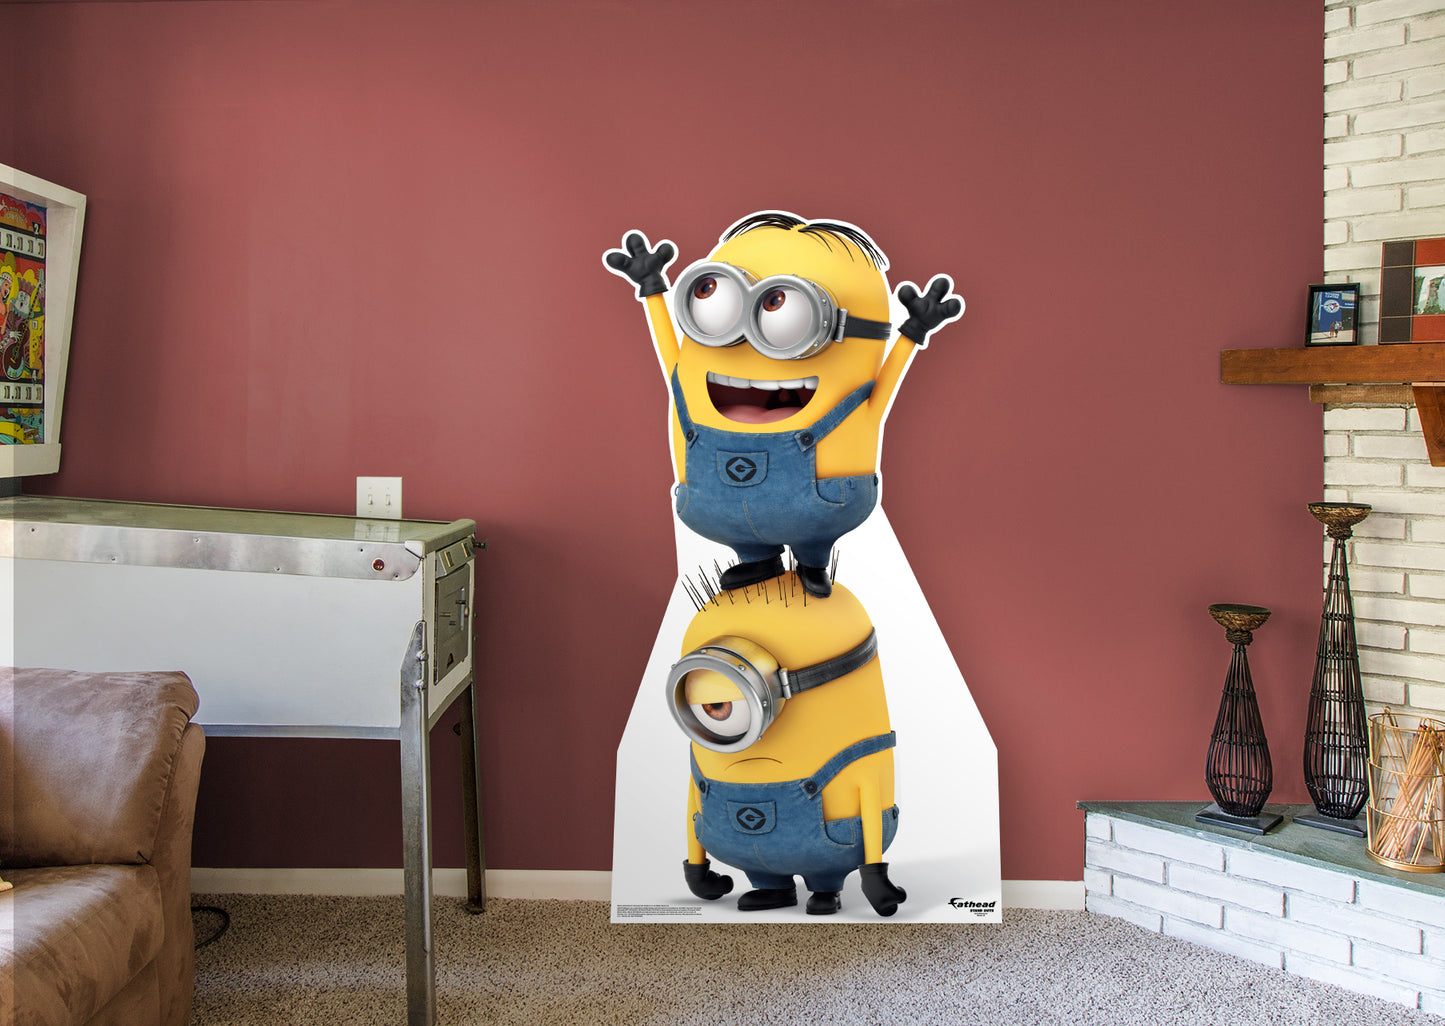 Minions:  Buddies  Life-Size   Foam Core Cutout  - Officially Licensed NBC Universal    Stand Out